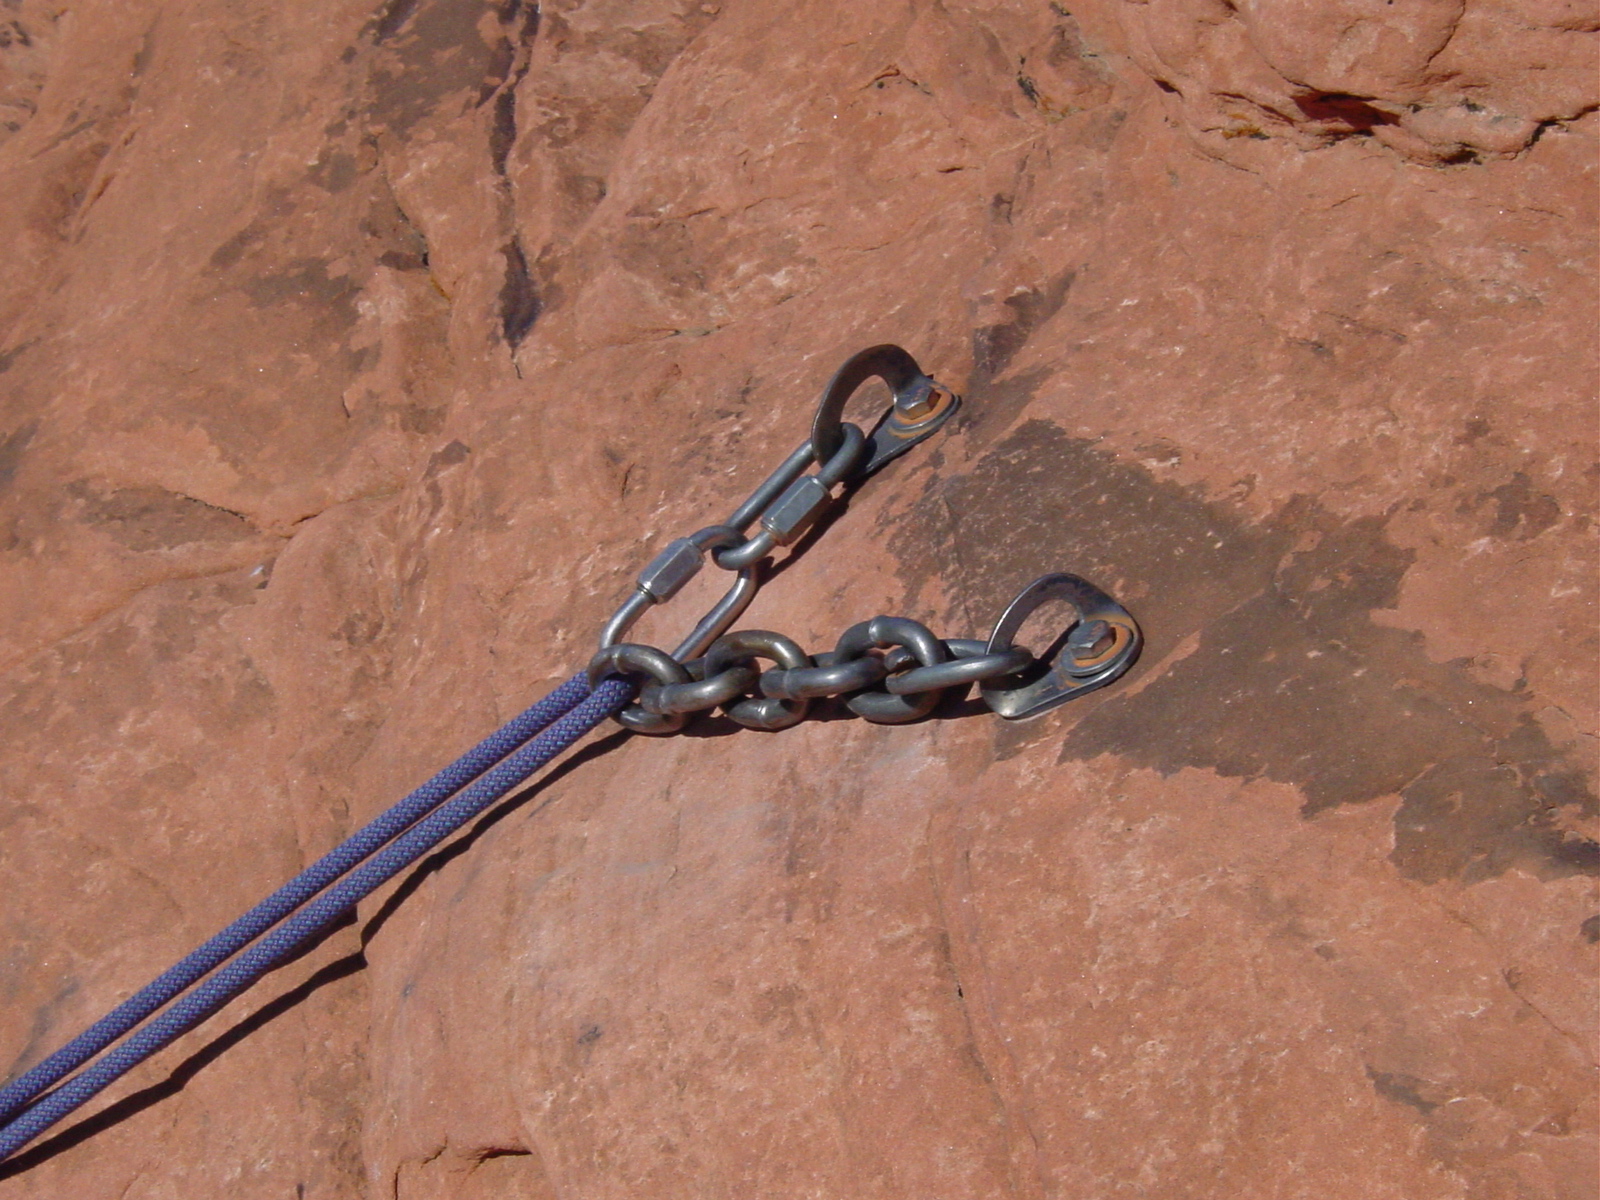 American Alpine Institute - Climbing Blog: What's Wrong with this